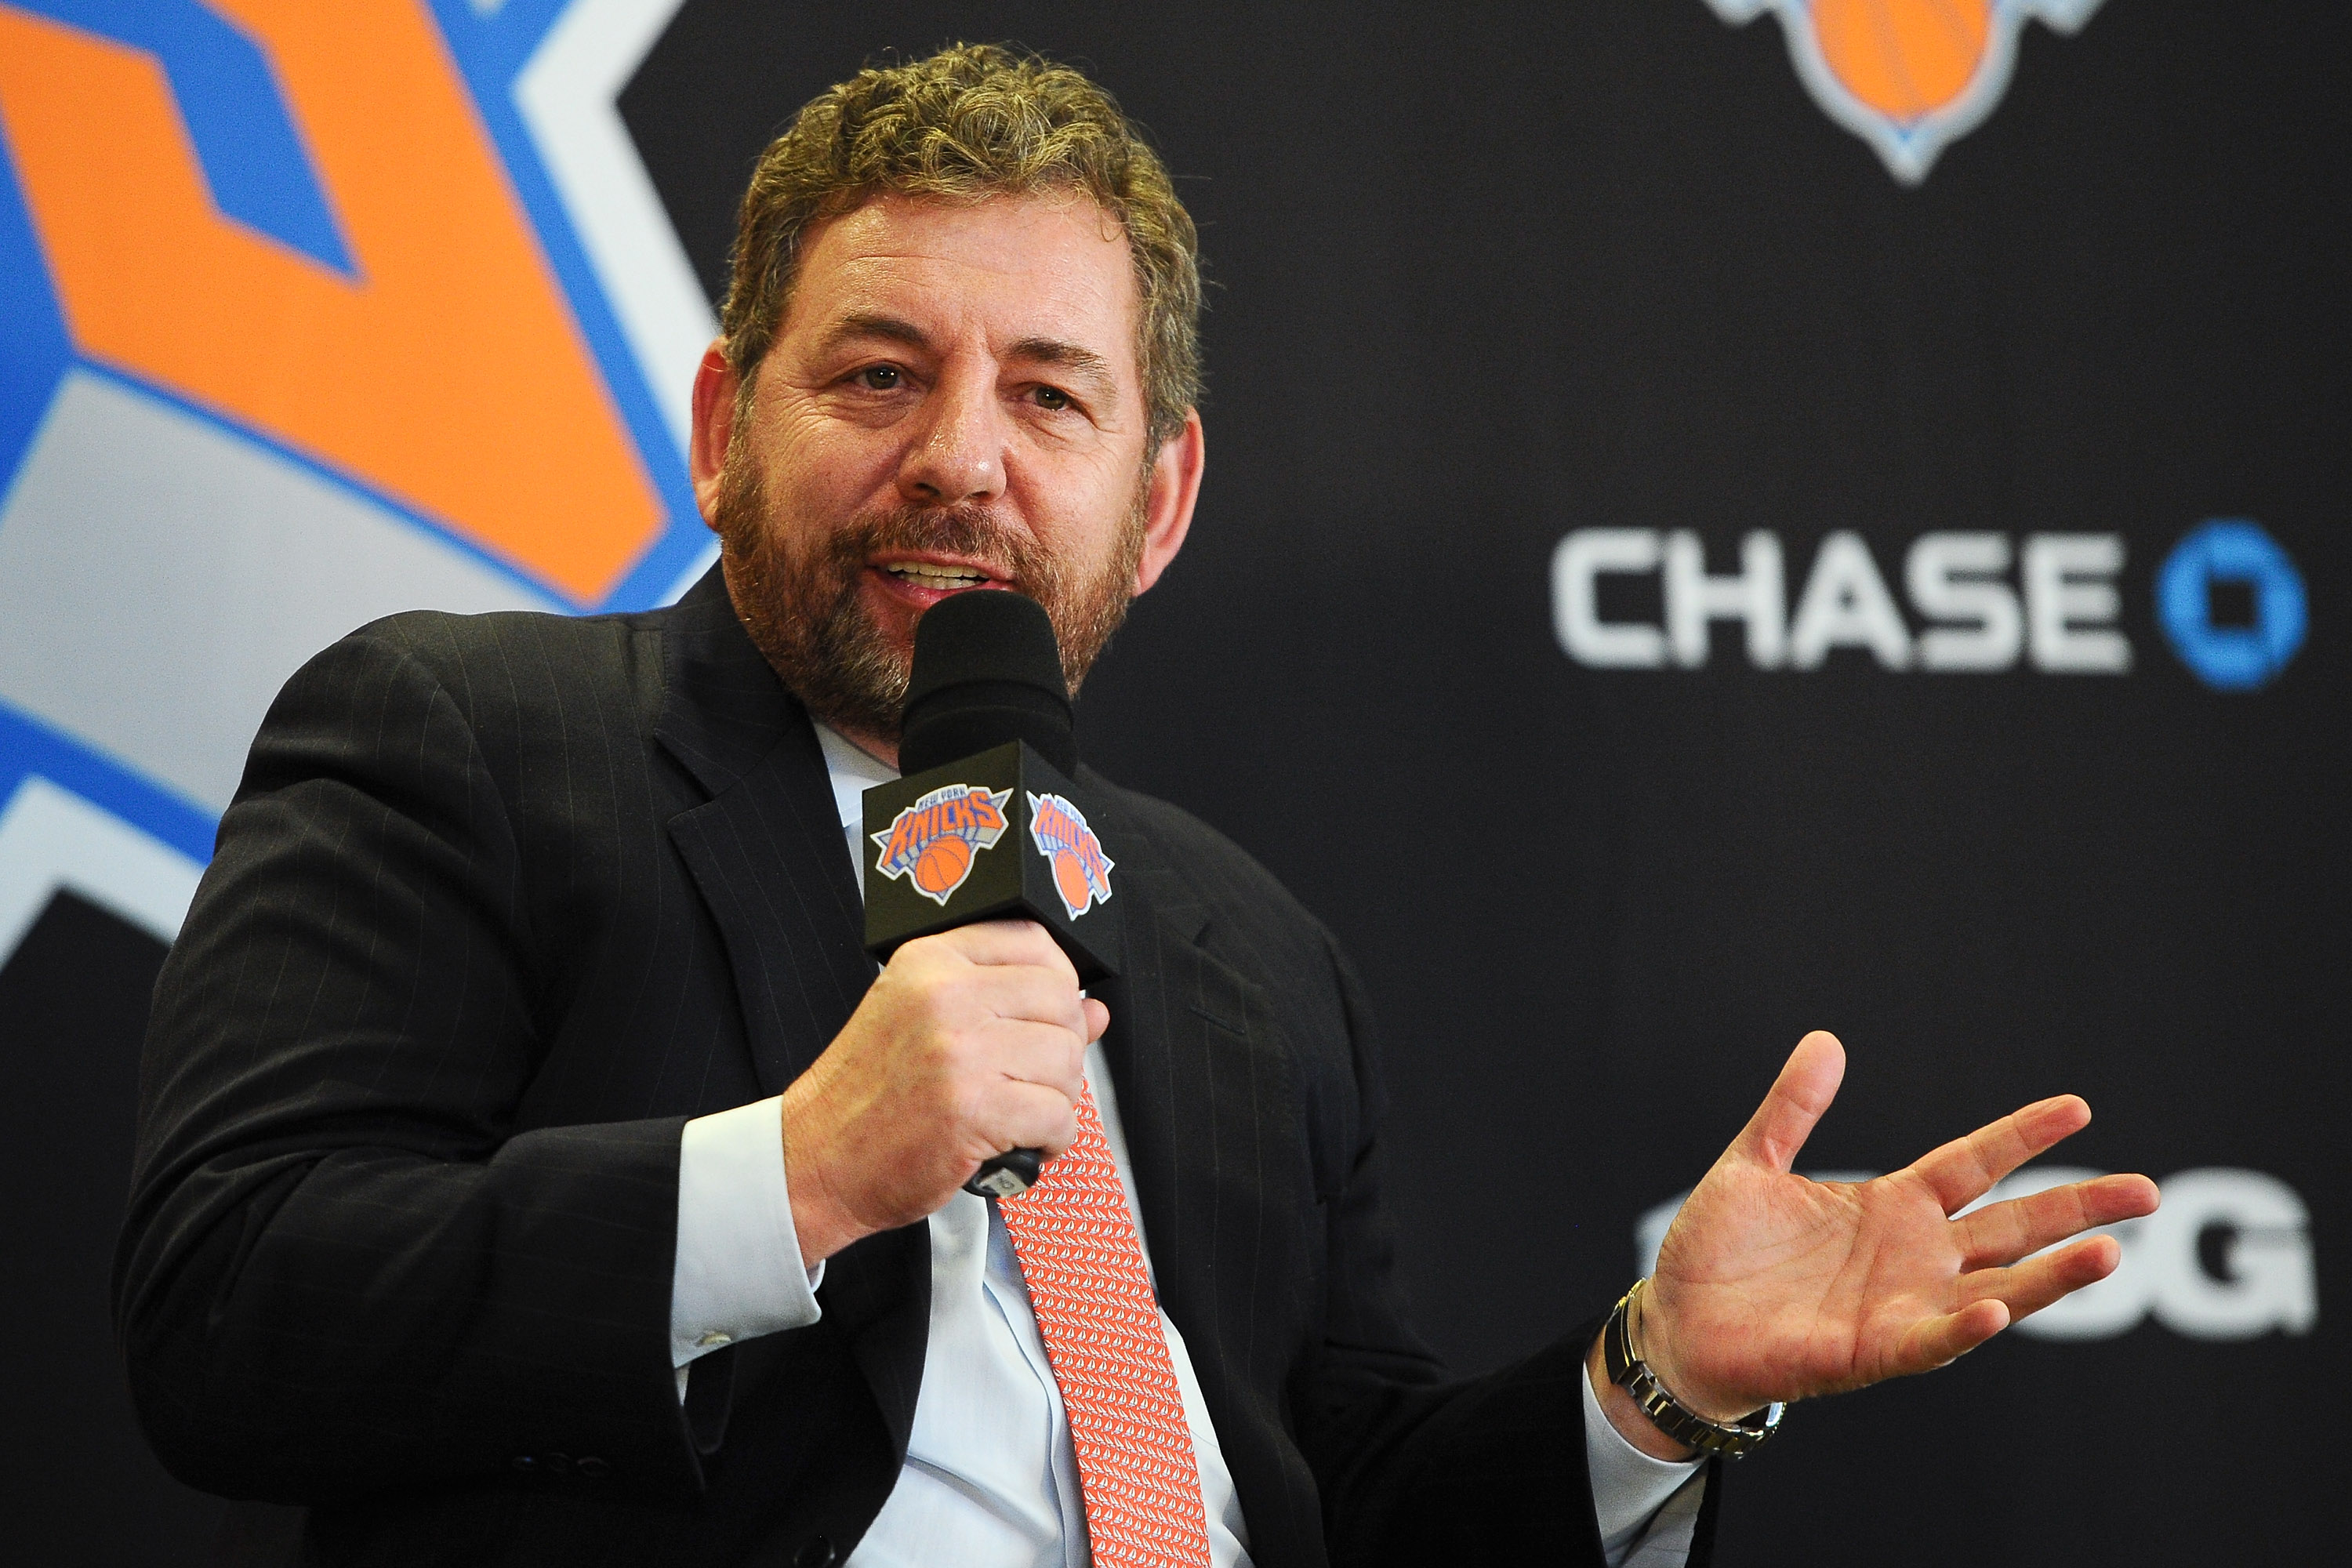 Knicks’ James Dolan Appears To Have A Burner Account On Twitter